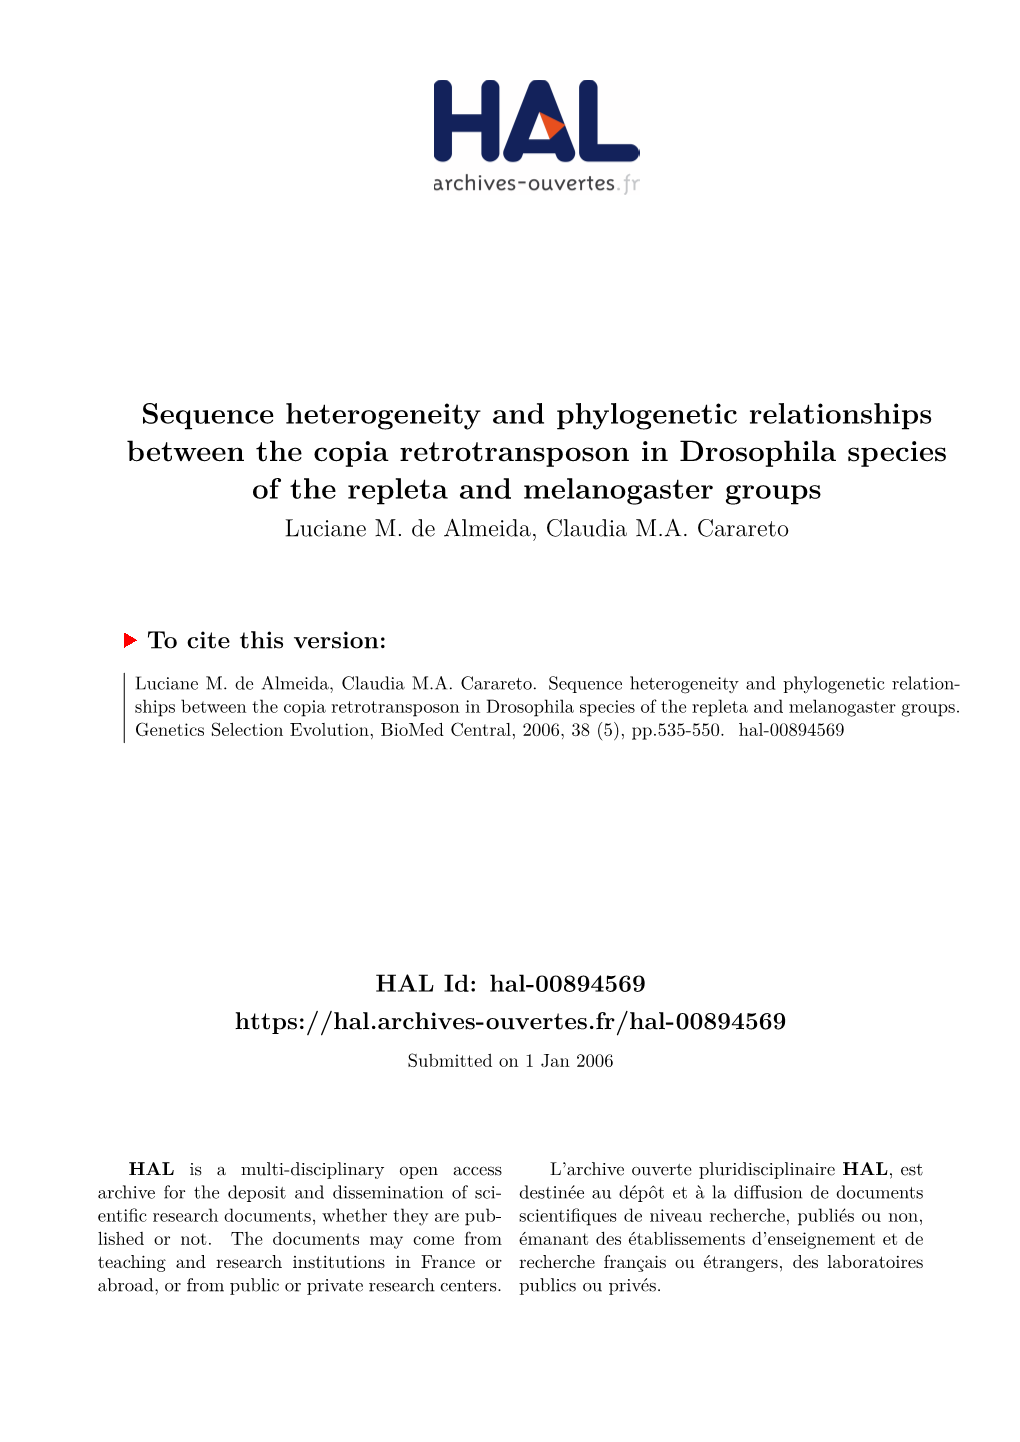 Sequence Heterogeneity and Phylogenetic Relationships Between the Copia Retrotransposon in Drosophila Species of the Repleta and Melanogaster Groups Luciane M